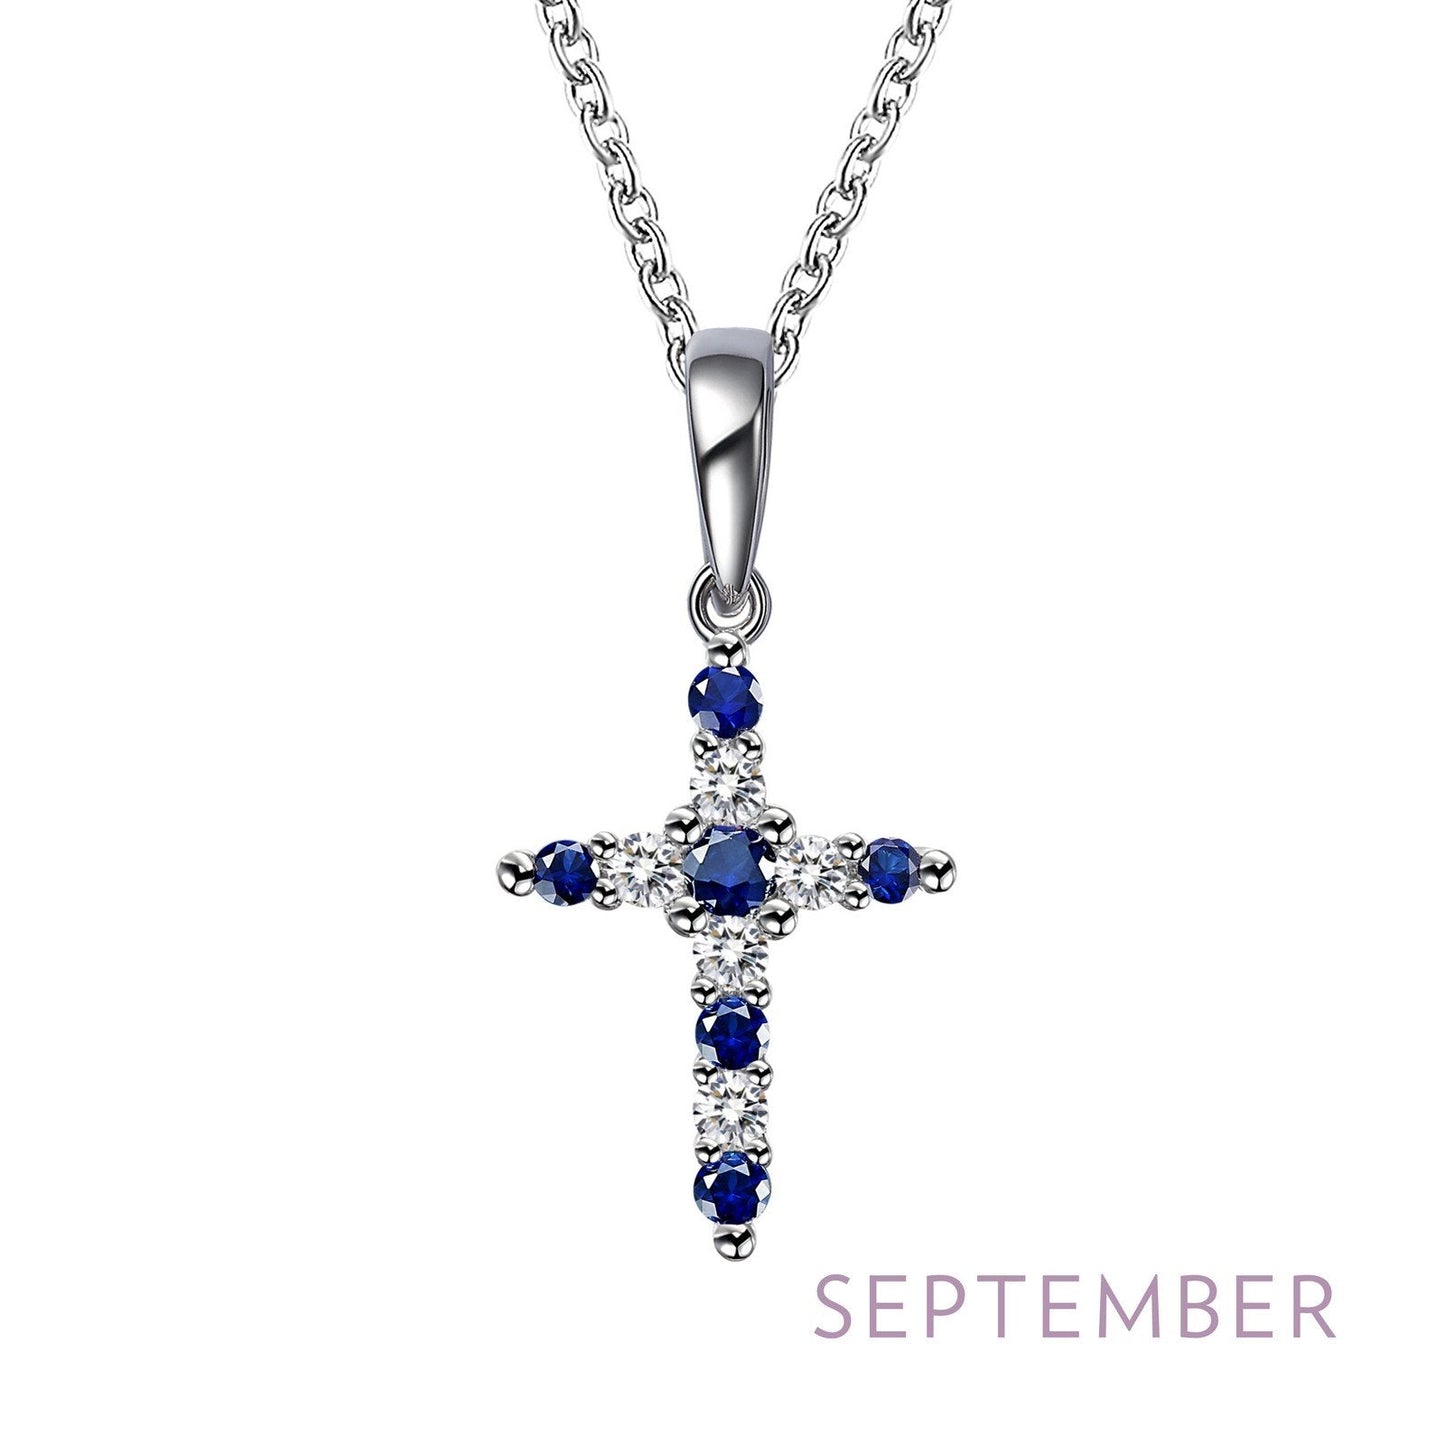 Load image into Gallery viewer, Lafonn September Birthstone Necklace SEPTEMBER NECKLACES Platinum 0.33cts CTS Approx. 25mm (H) x 12.5mm (W)
